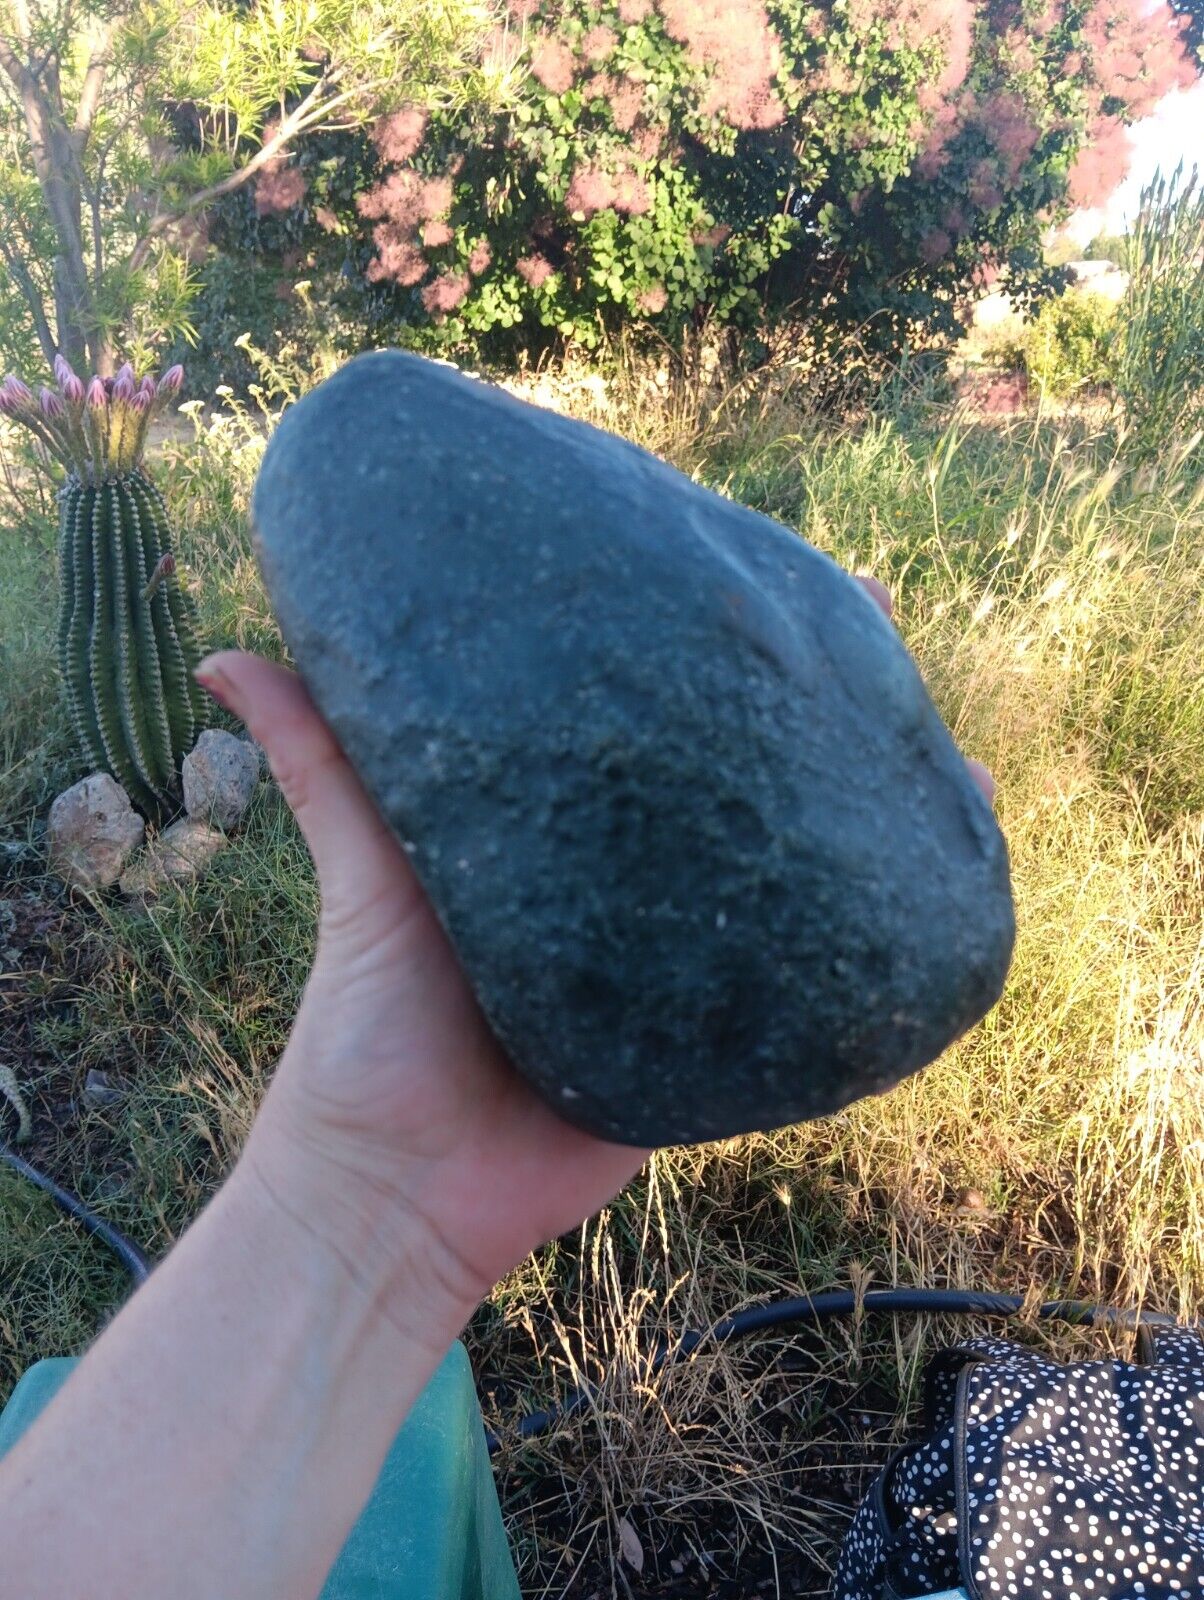 Interesting Unknown Green Rock From California R2#19